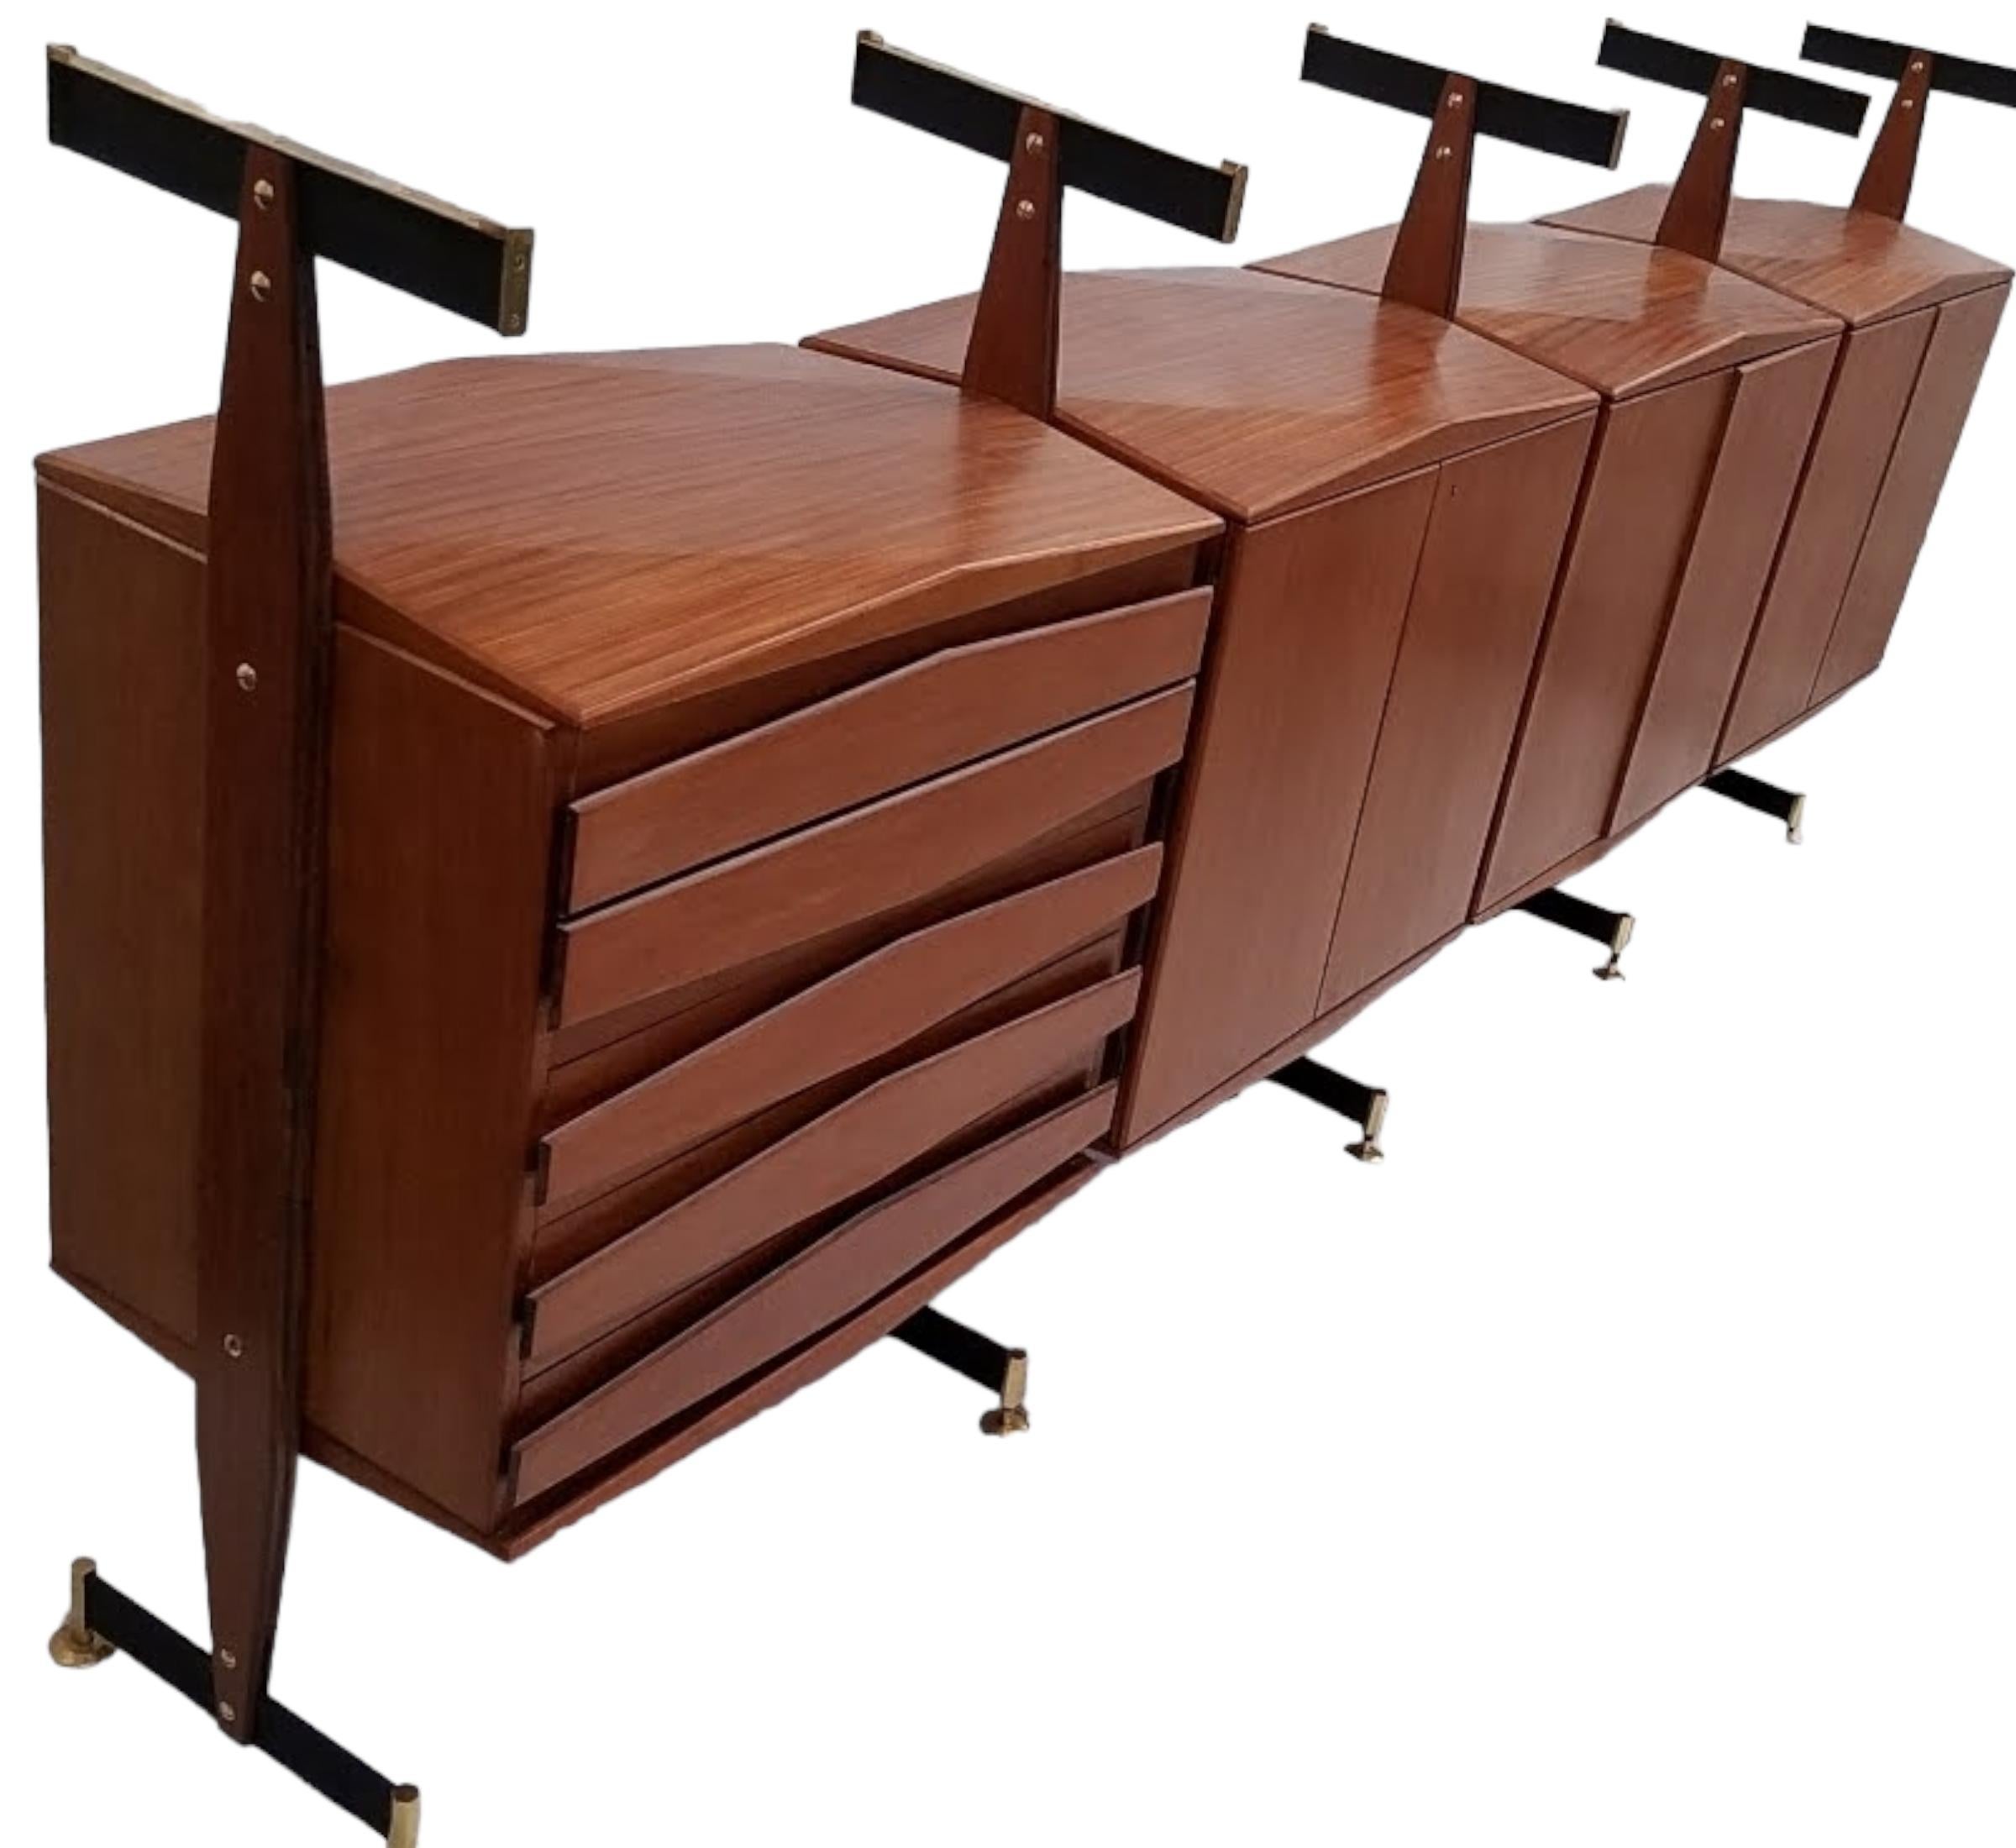 A very rare and sophisticated sideboard by Vittorio Dassi stamped Permanente Mobili Cantu Italy from the 1950s consisting of four suspended cabinets, three of which have locking doors, the fourth has drawers with raised hexagonal pulls.
Each